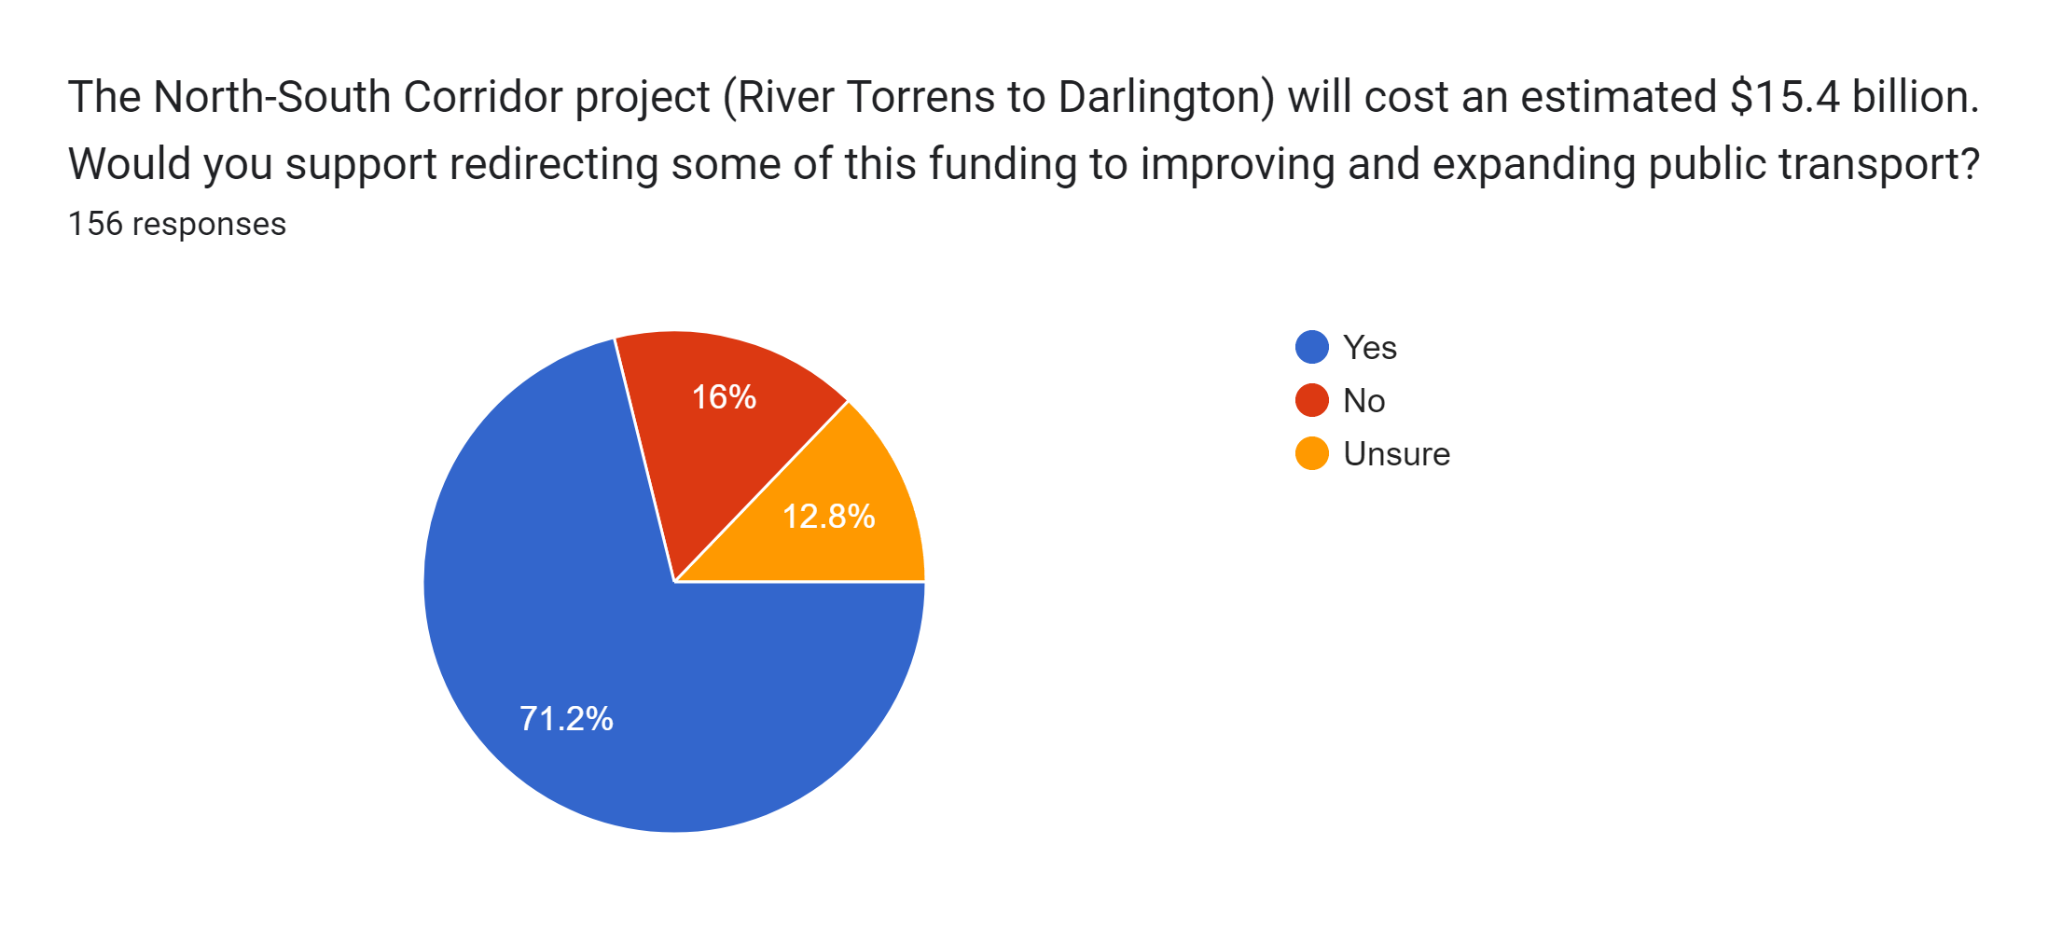 Forms response chart. Question title: The North-South Corridor project (River Torrens to Darlington) will cost an estimated $15.4 billion. Would you support redirecting some of this funding to improving and expanding public transport?. Number of responses: 156 responses.